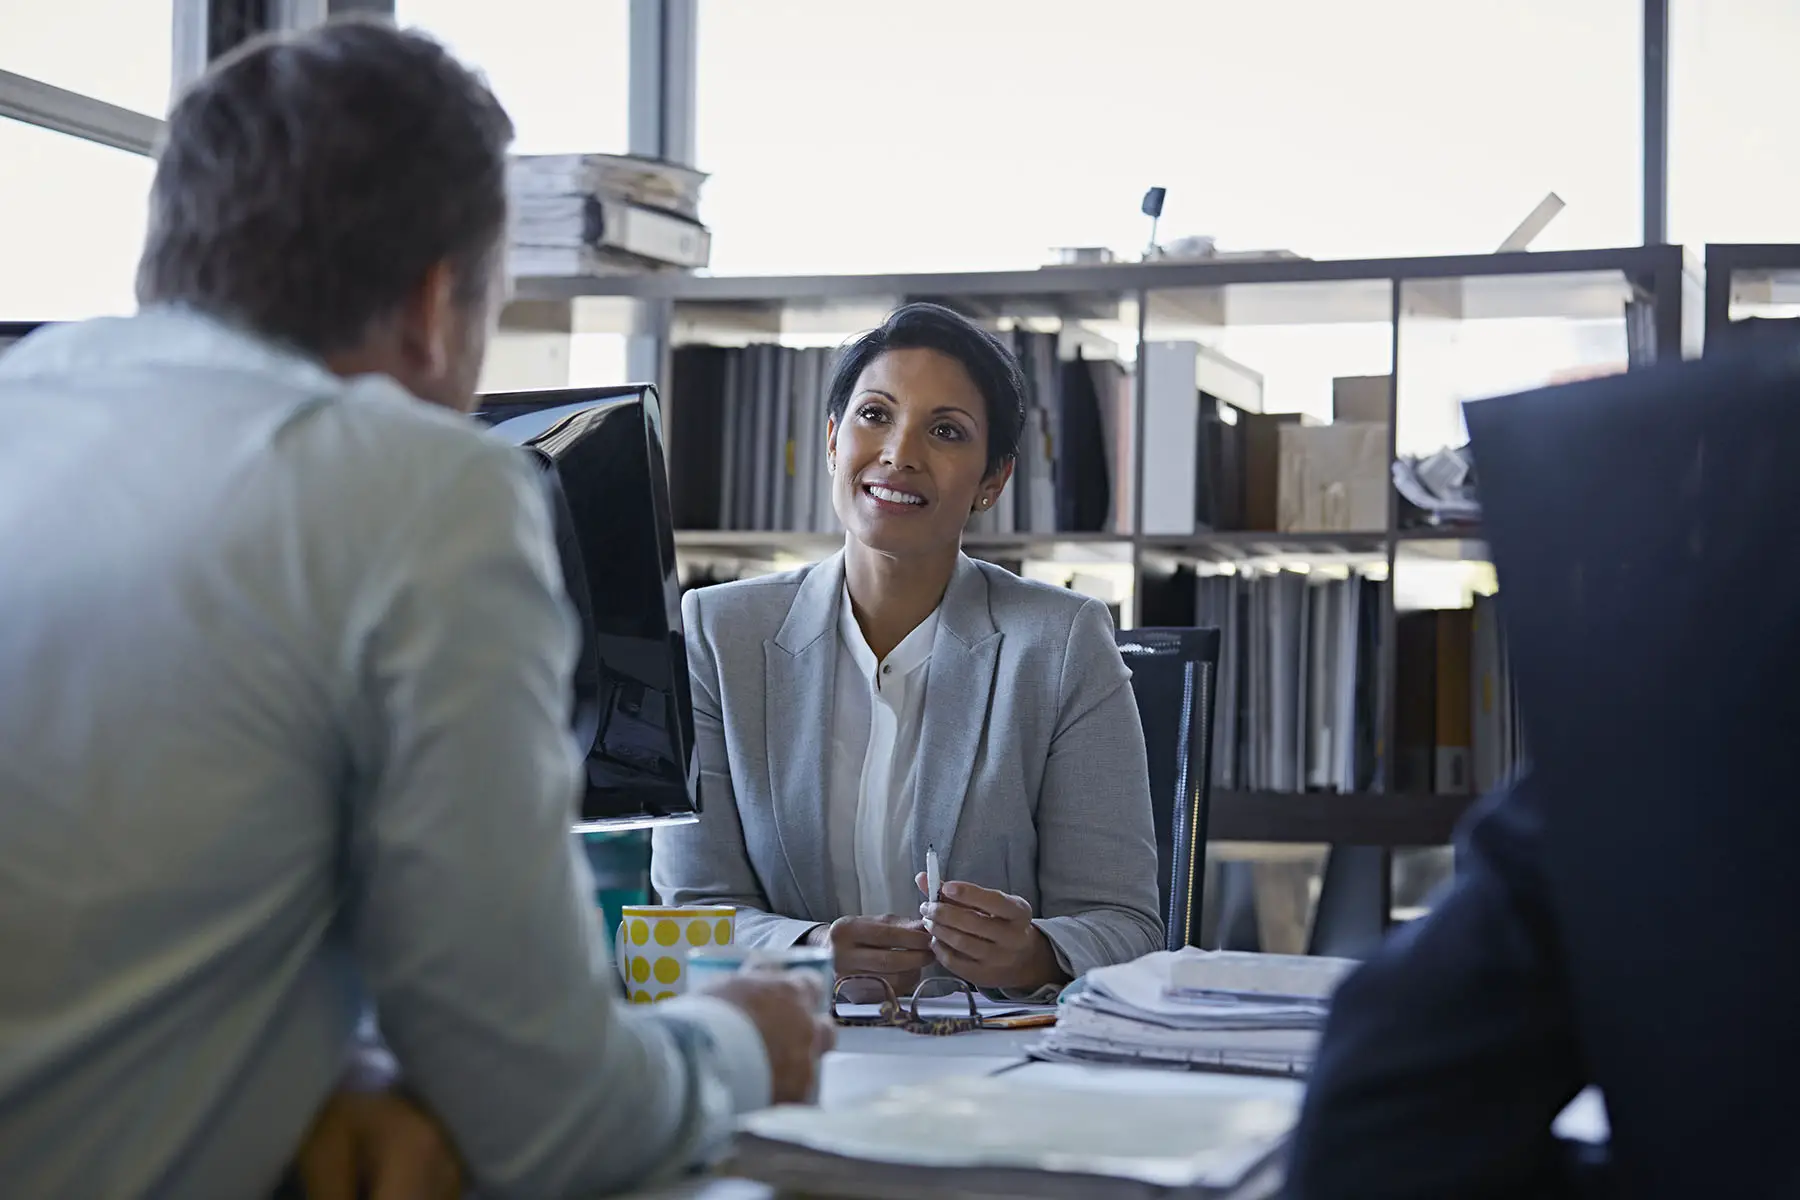 Confident smiling businesswoman discussing with coworkers at desk in an office.